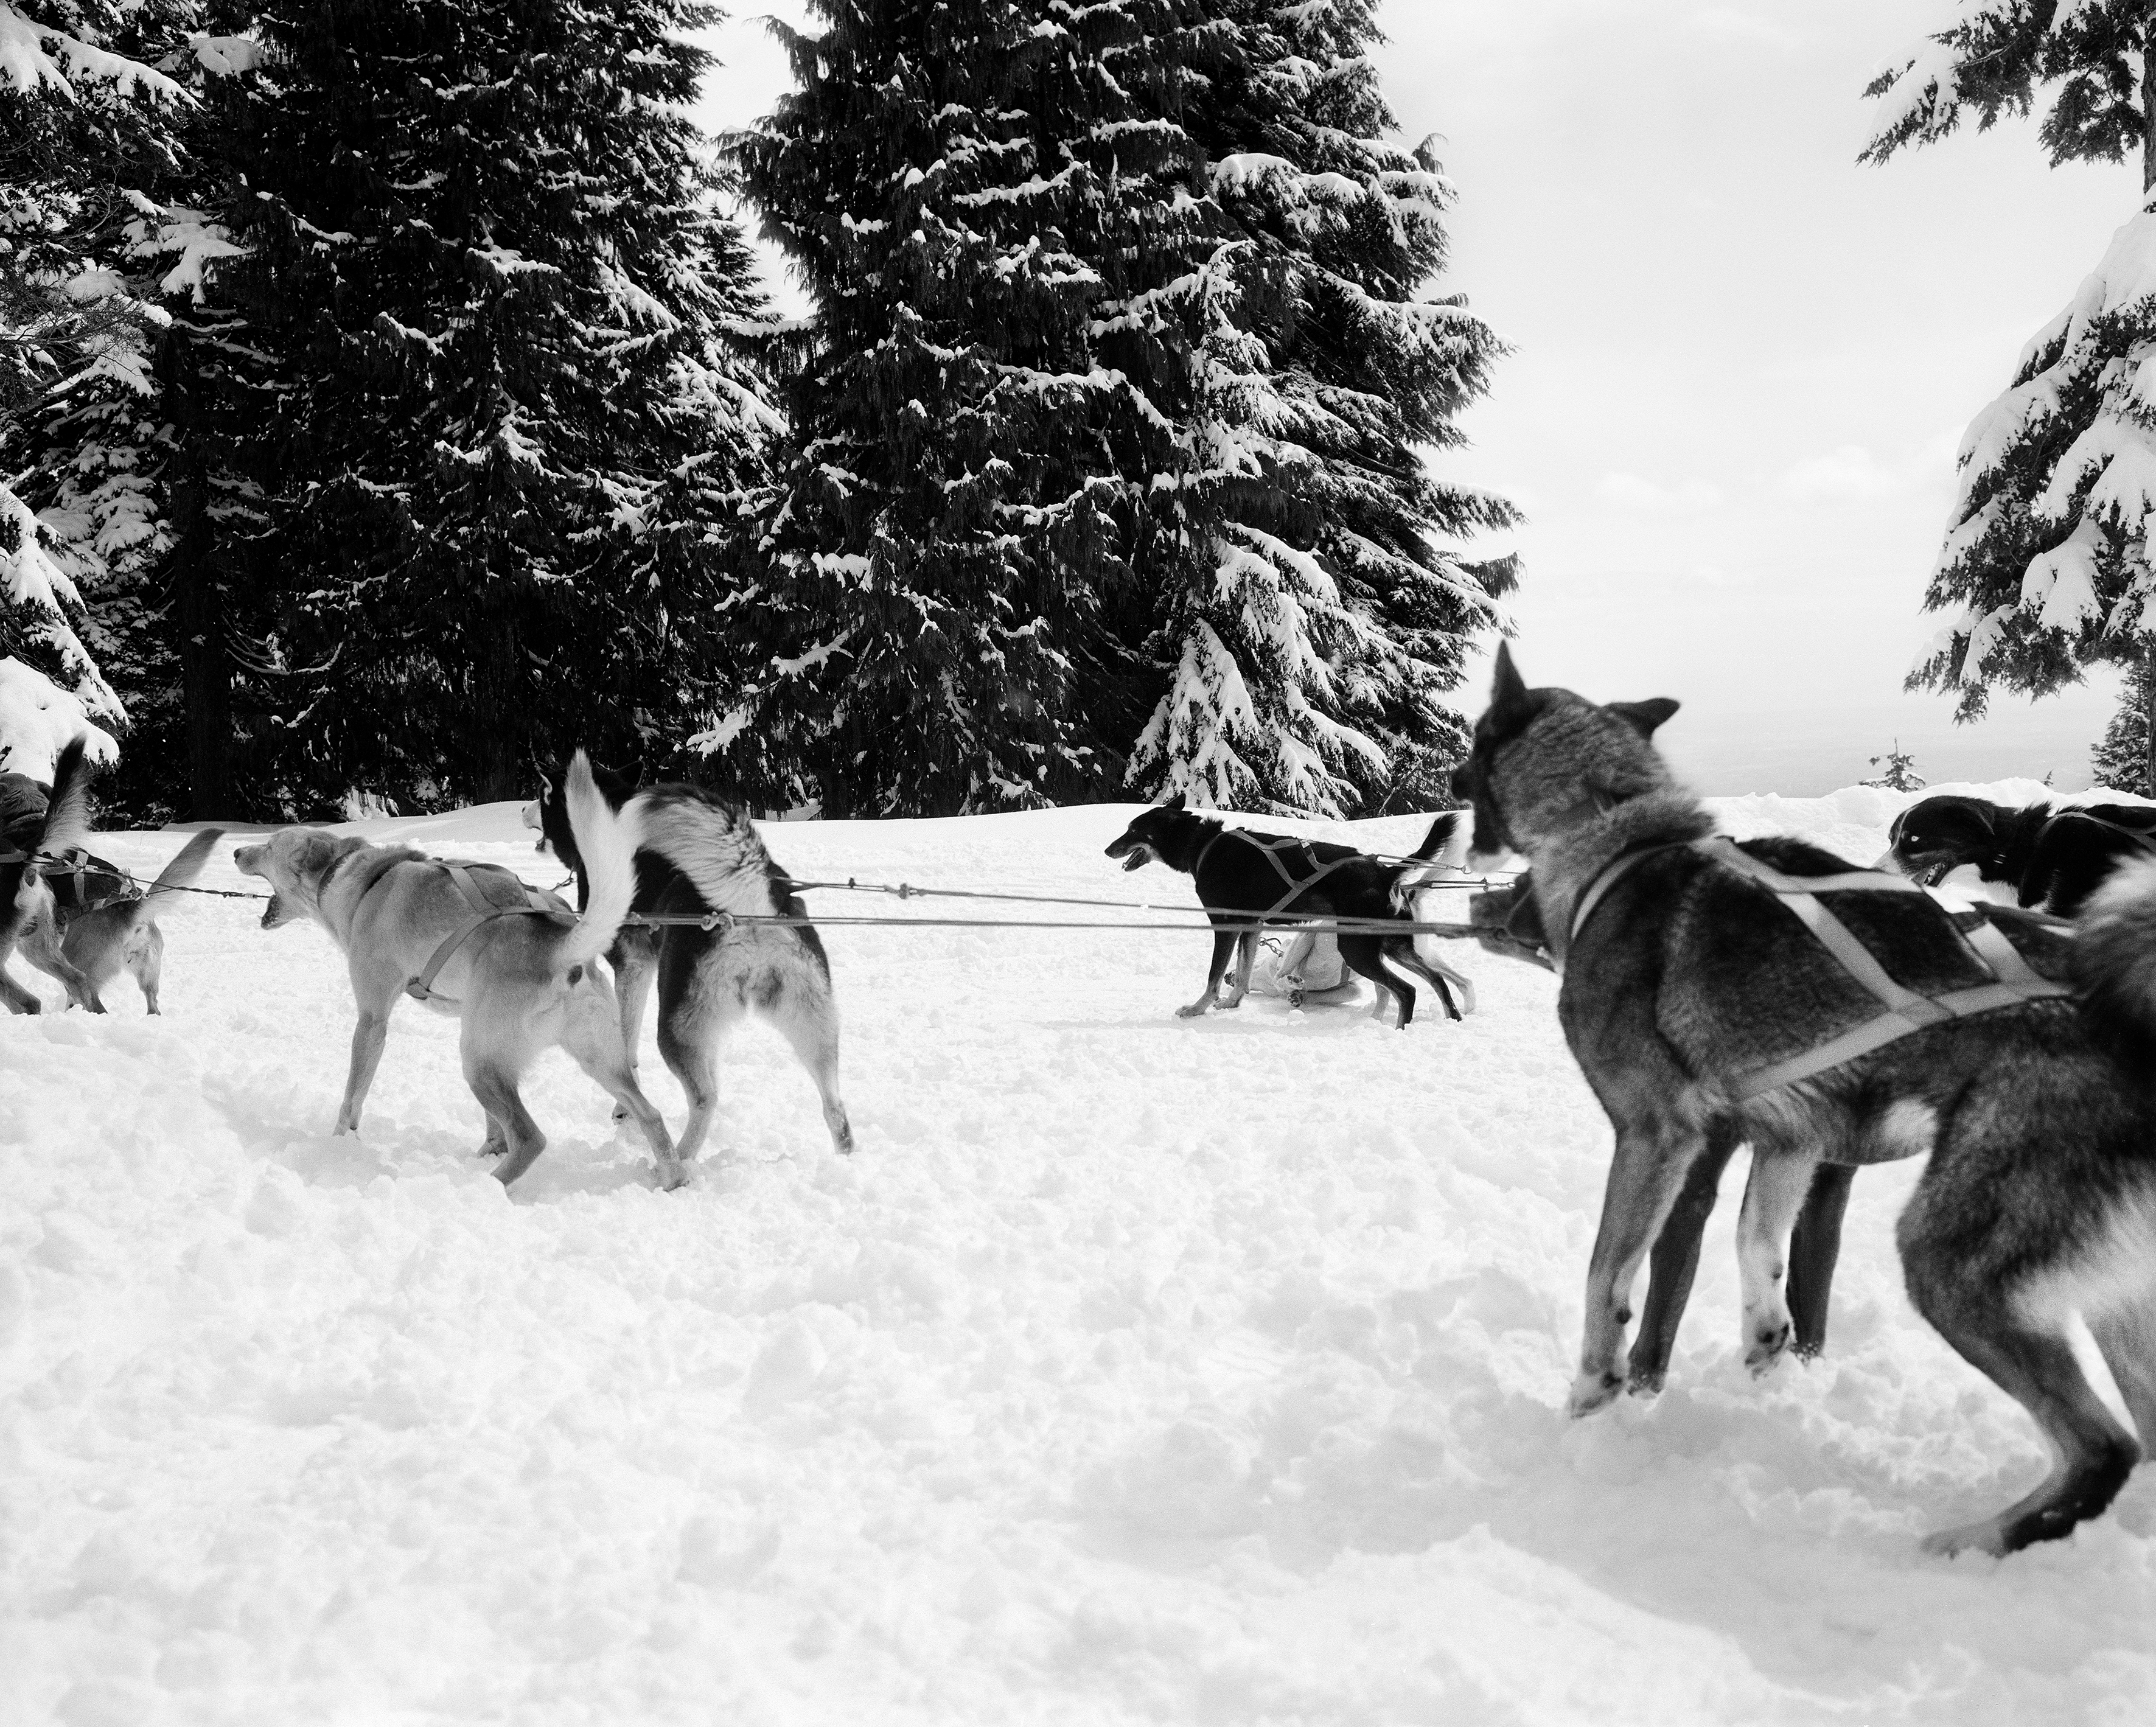  - Snow dogs, Vancouver, 2008